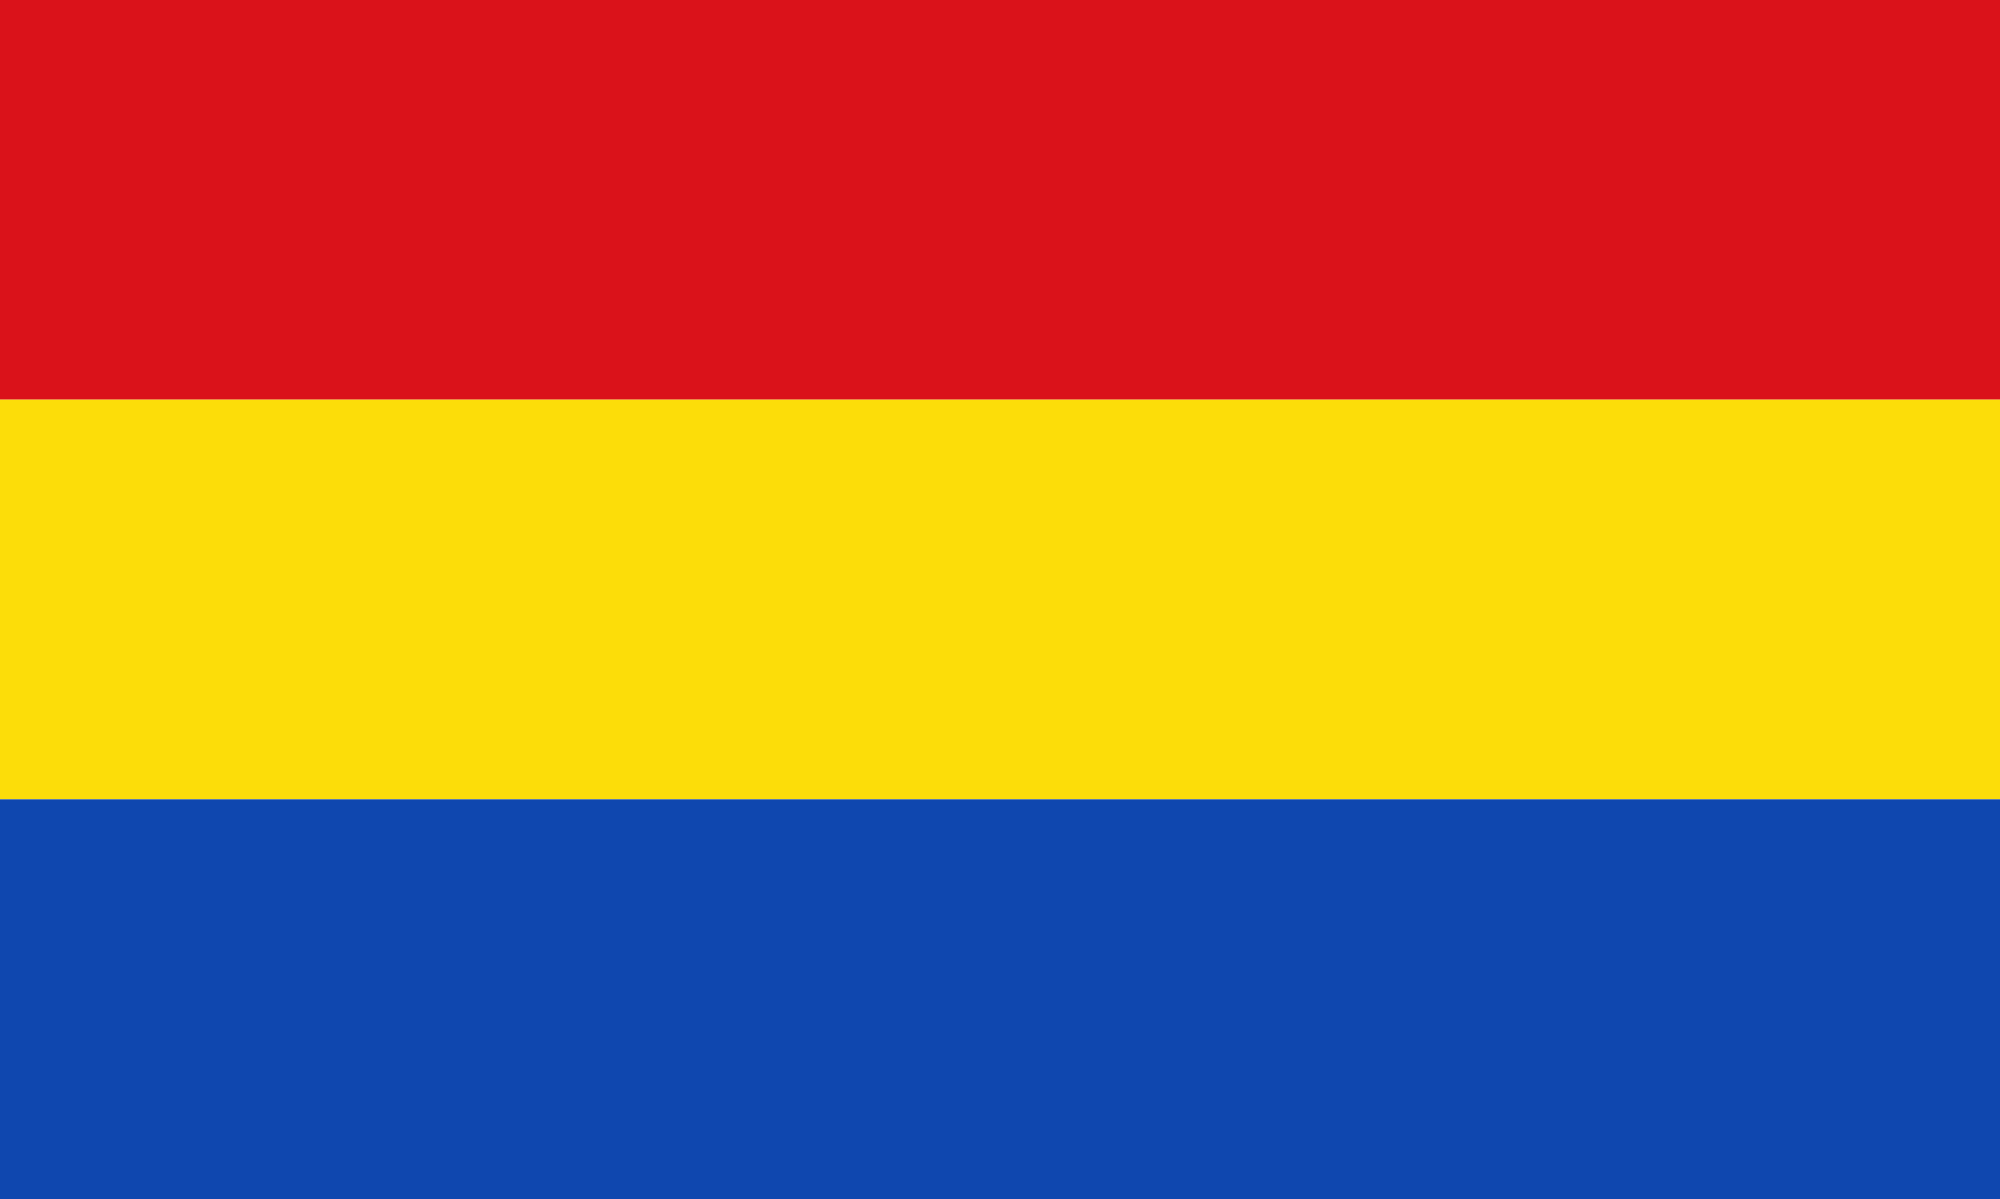 Red Yellow -Green Flag Logo - File:Flag red yellow blue 5x3.svg - Wikimedia Commons